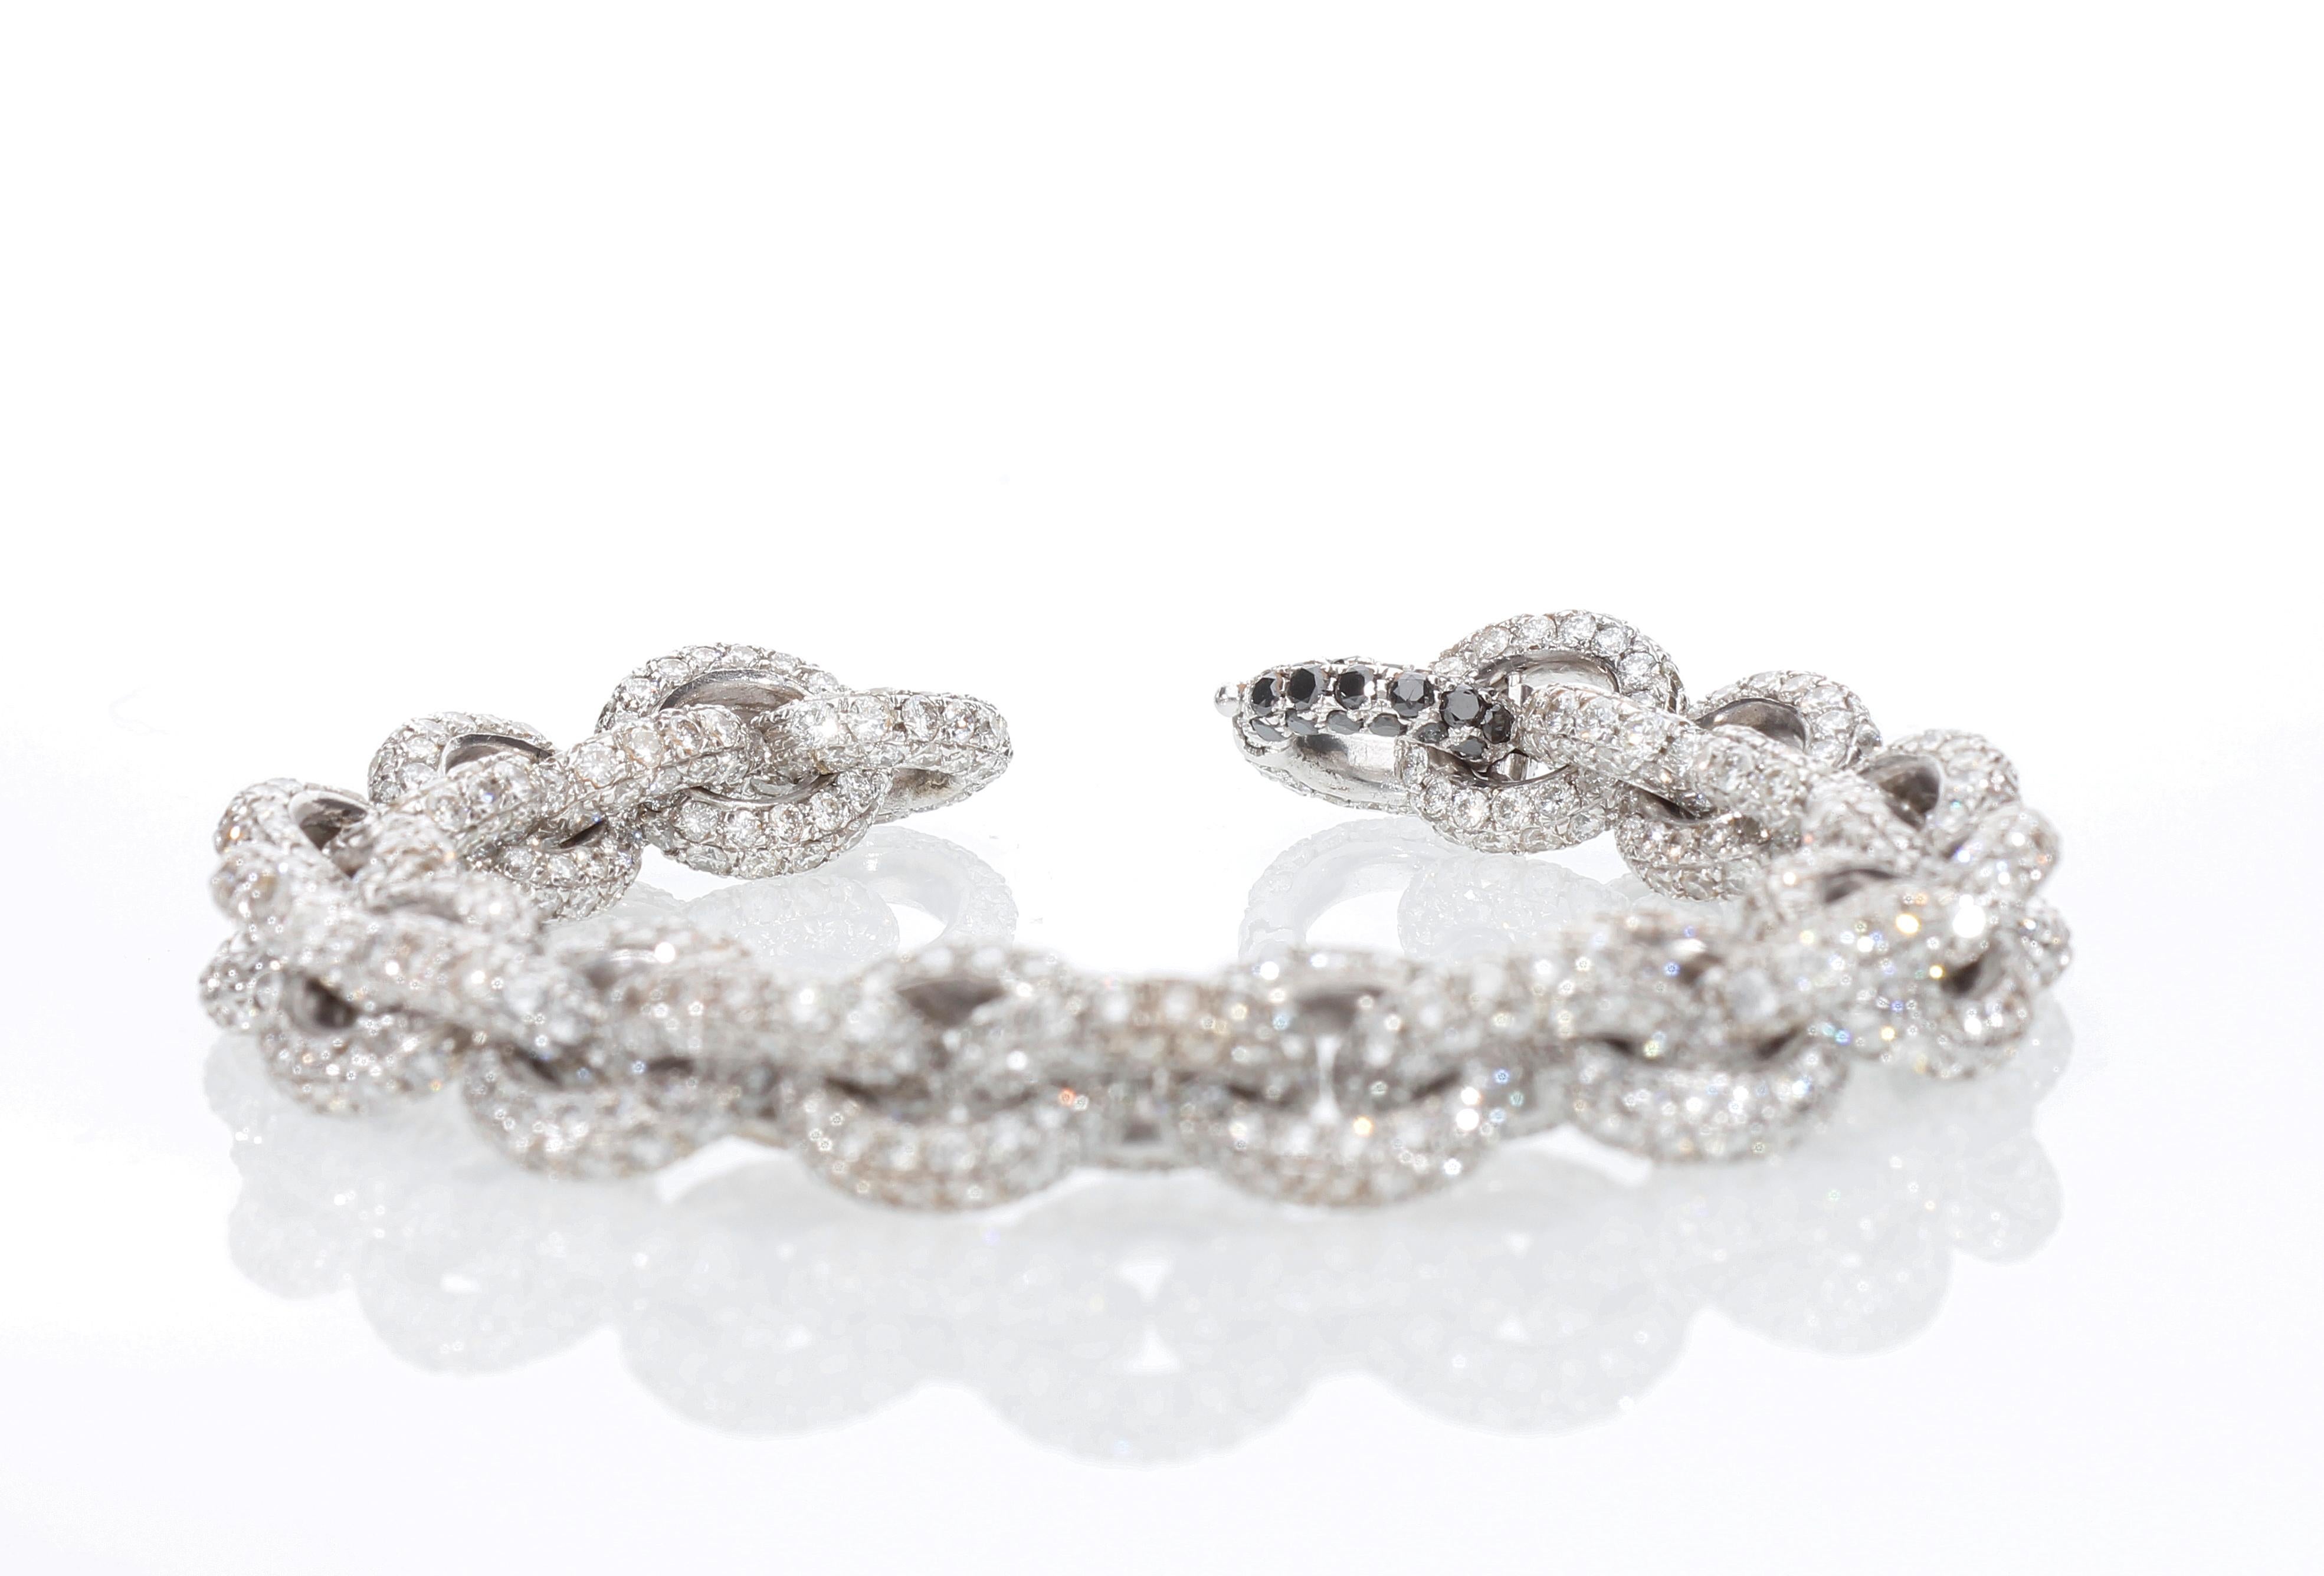 Women's or Men's Chain Bracelet with 30.76 Ct of White Diamonds. Handmade. Made in Italy For Sale